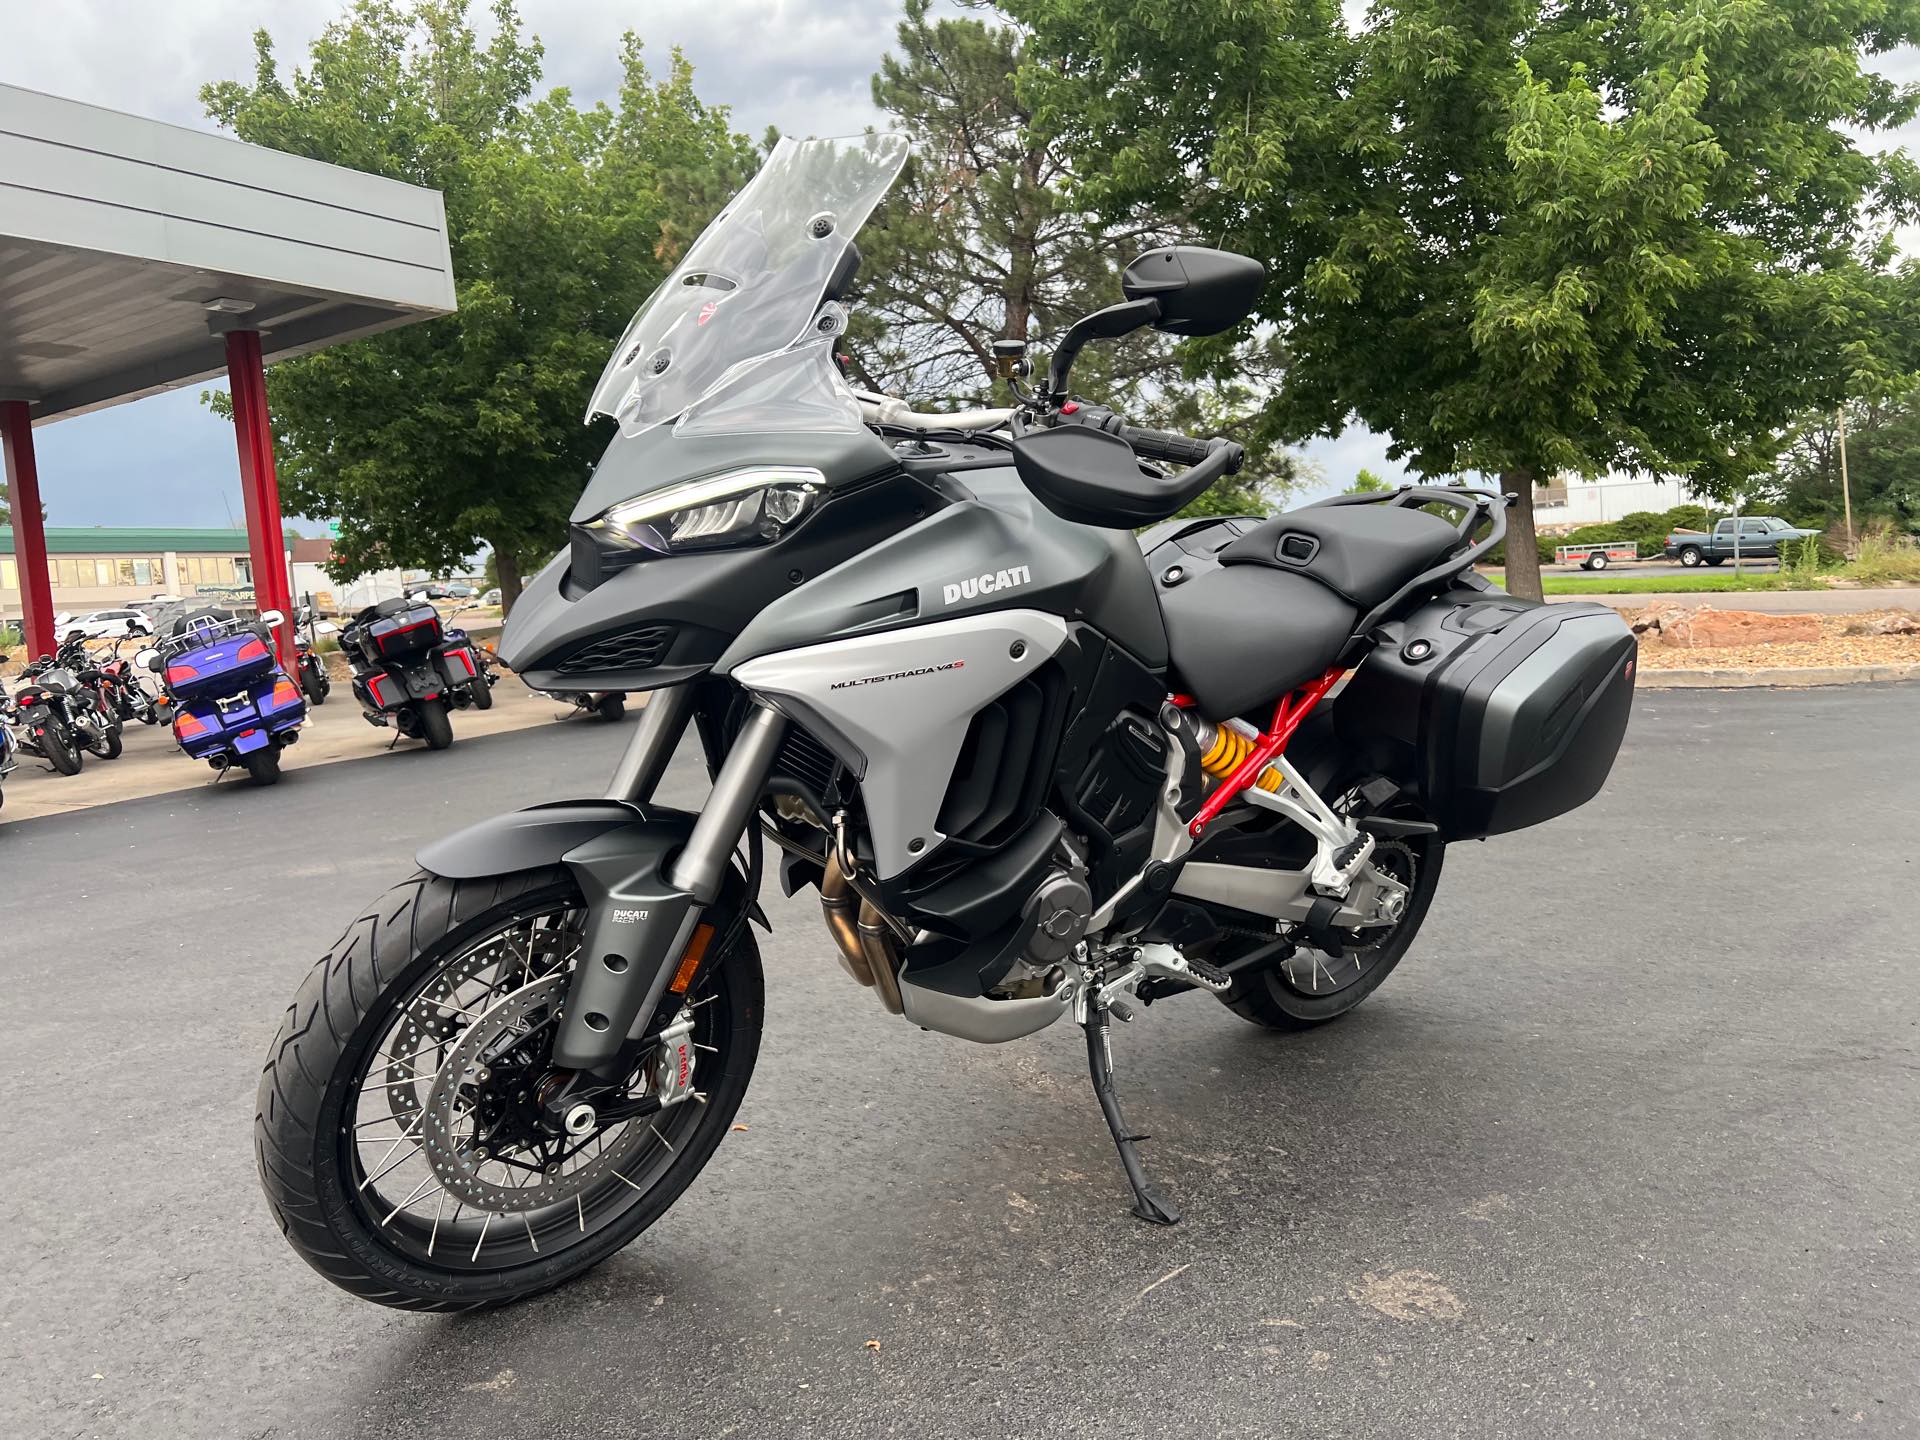 2022 Ducati Multistrada V4 S at Aces Motorcycles - Fort Collins